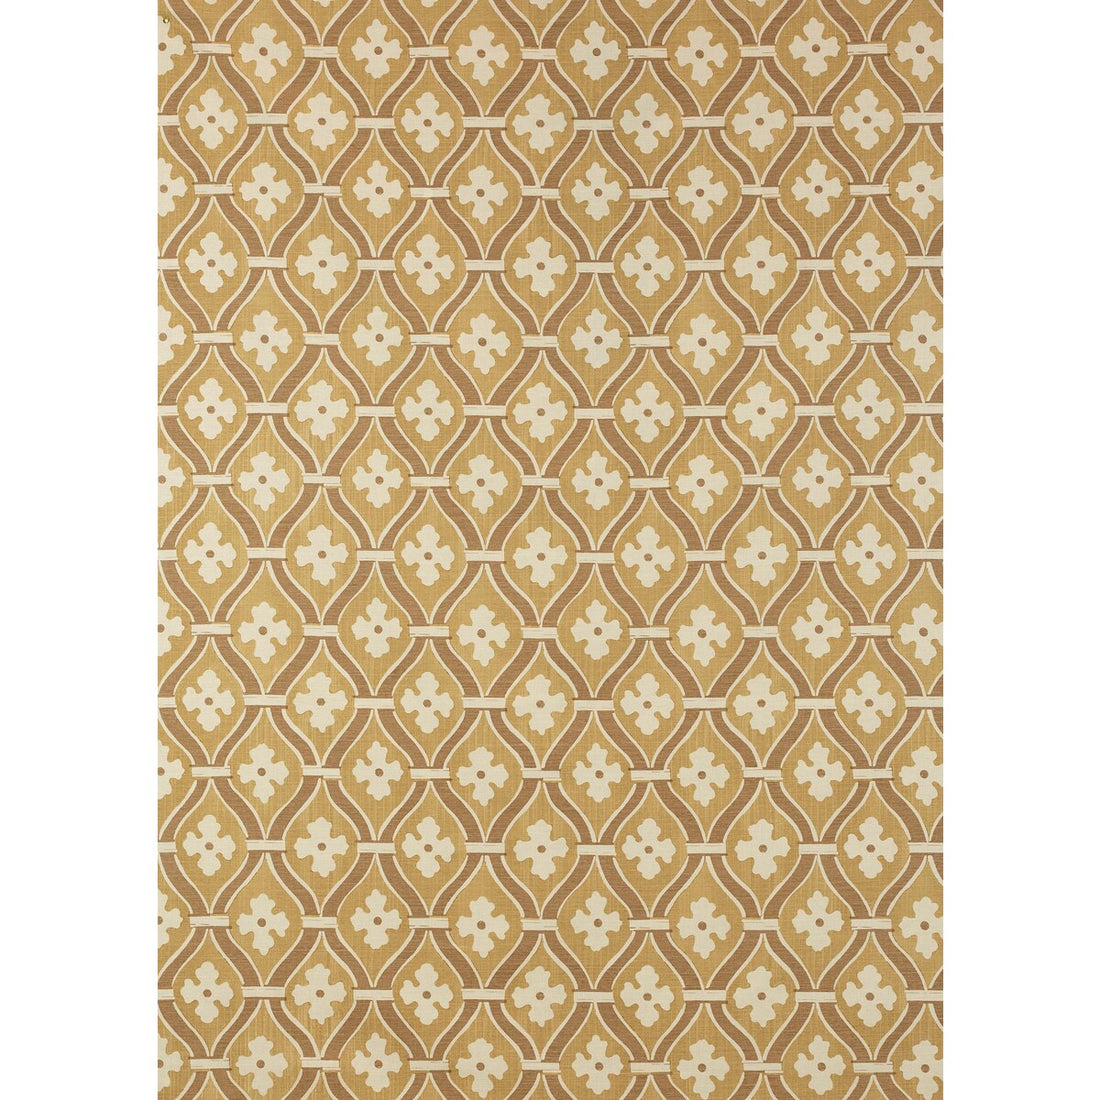 Byblos fabric in beige color - pattern 2022121.1614.0 - by Lee Jofa in the Paolo Moschino Persepolis collection